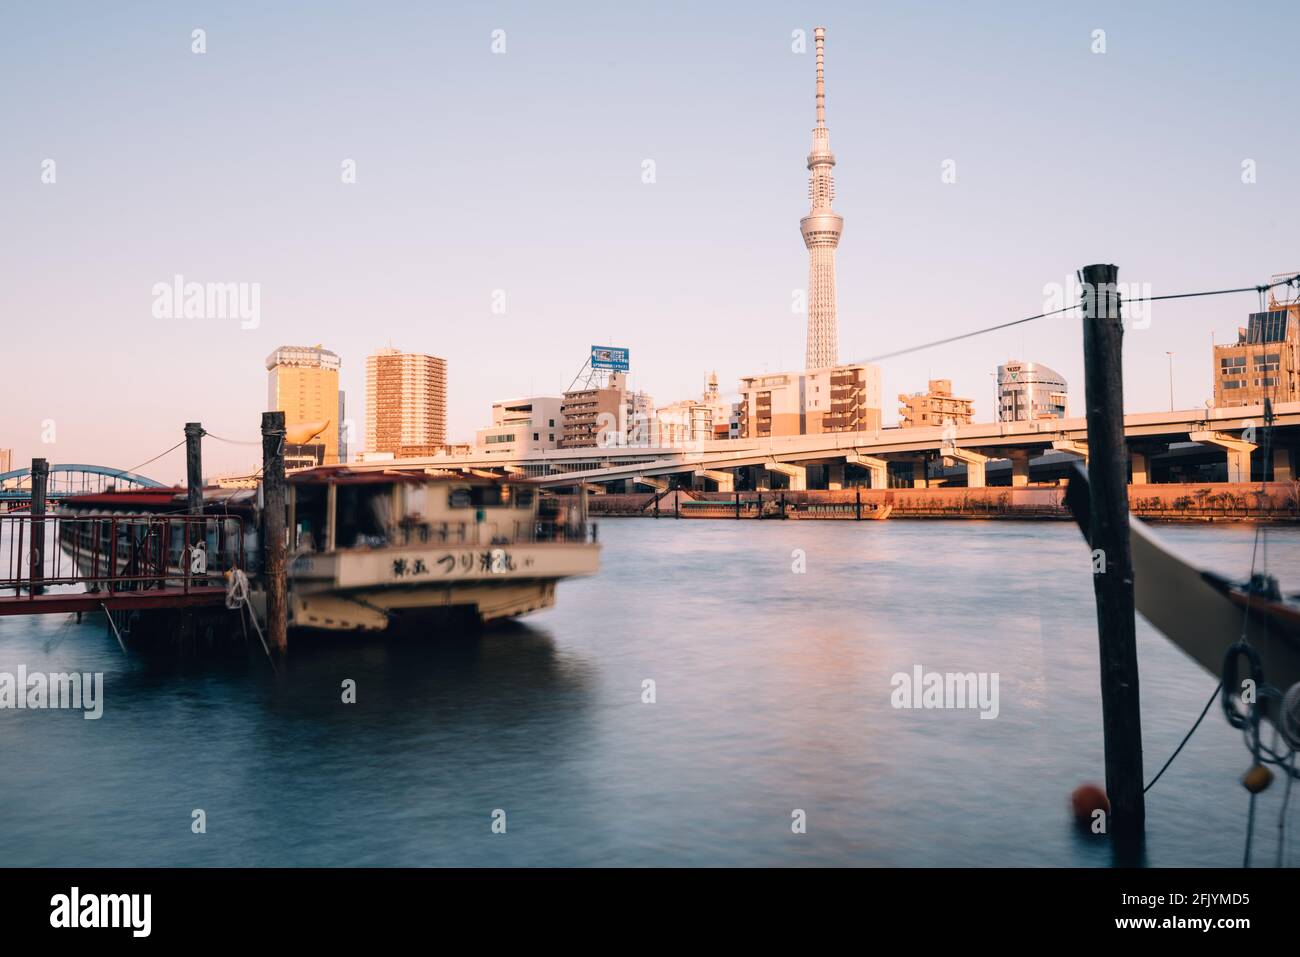 Tokyo, Japan - December 12, 2015: Tokyo Skytree and Sumida River, Tokyo, Japan. Tokyo Skytree at 634m, is the tallest free-standing broadcasting tower Stock Photo